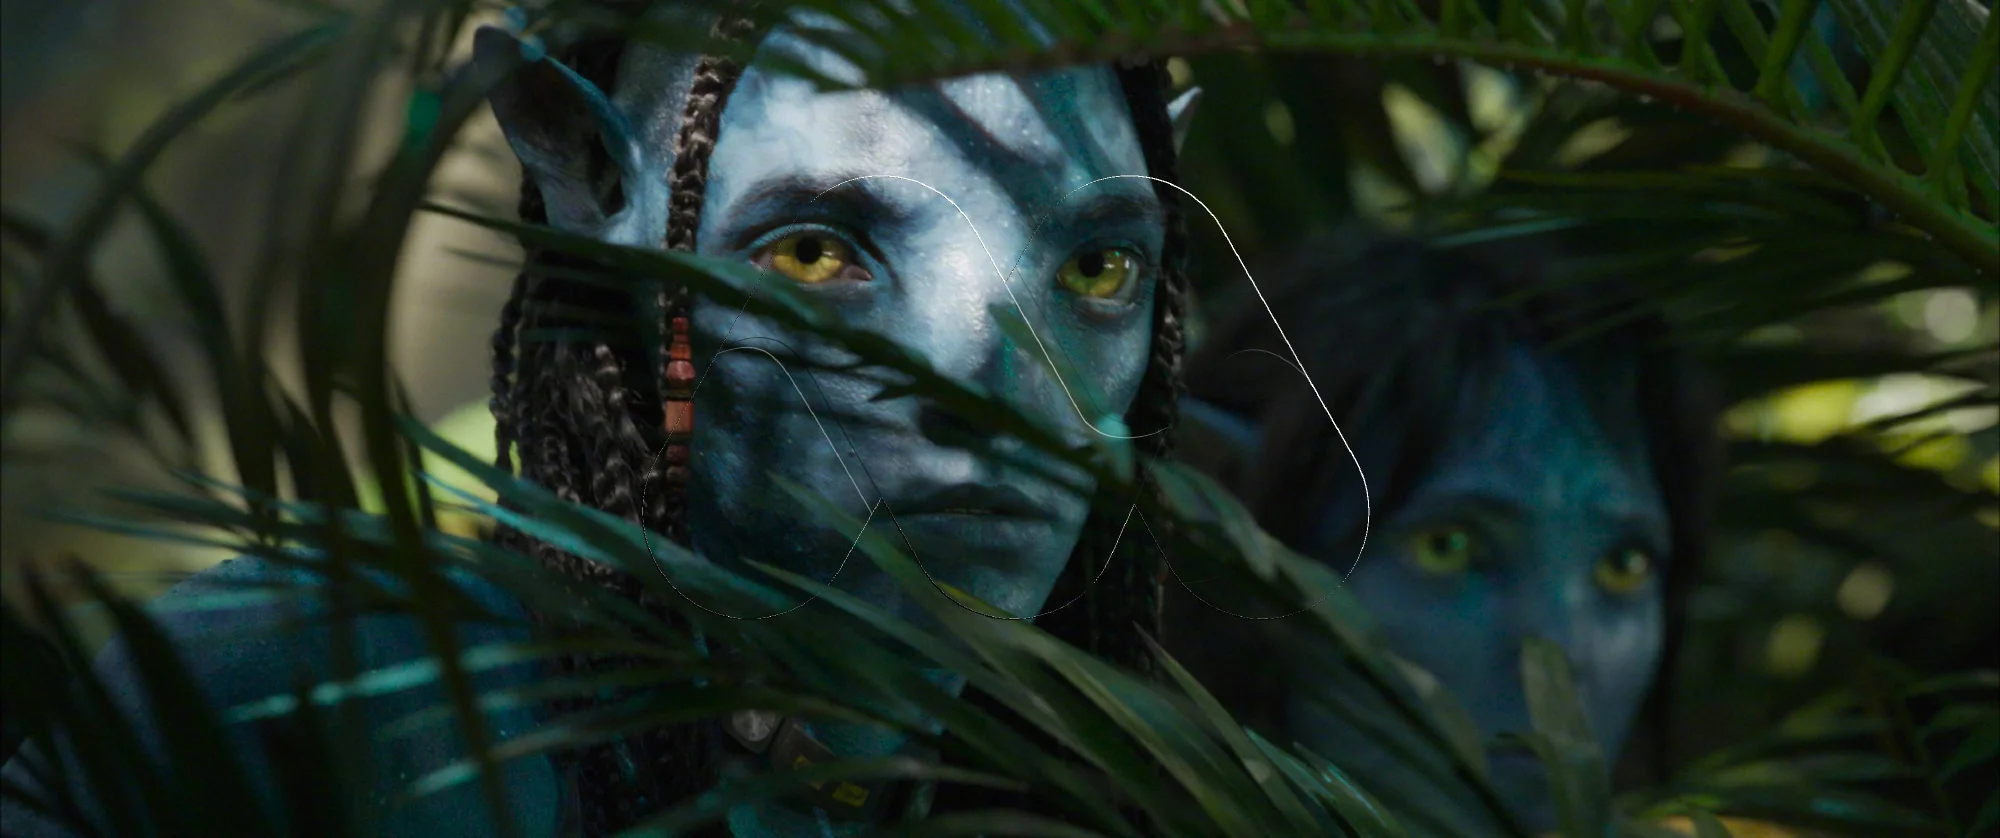 avatar-the-way-of-water-exposes-massive-new-stills-6